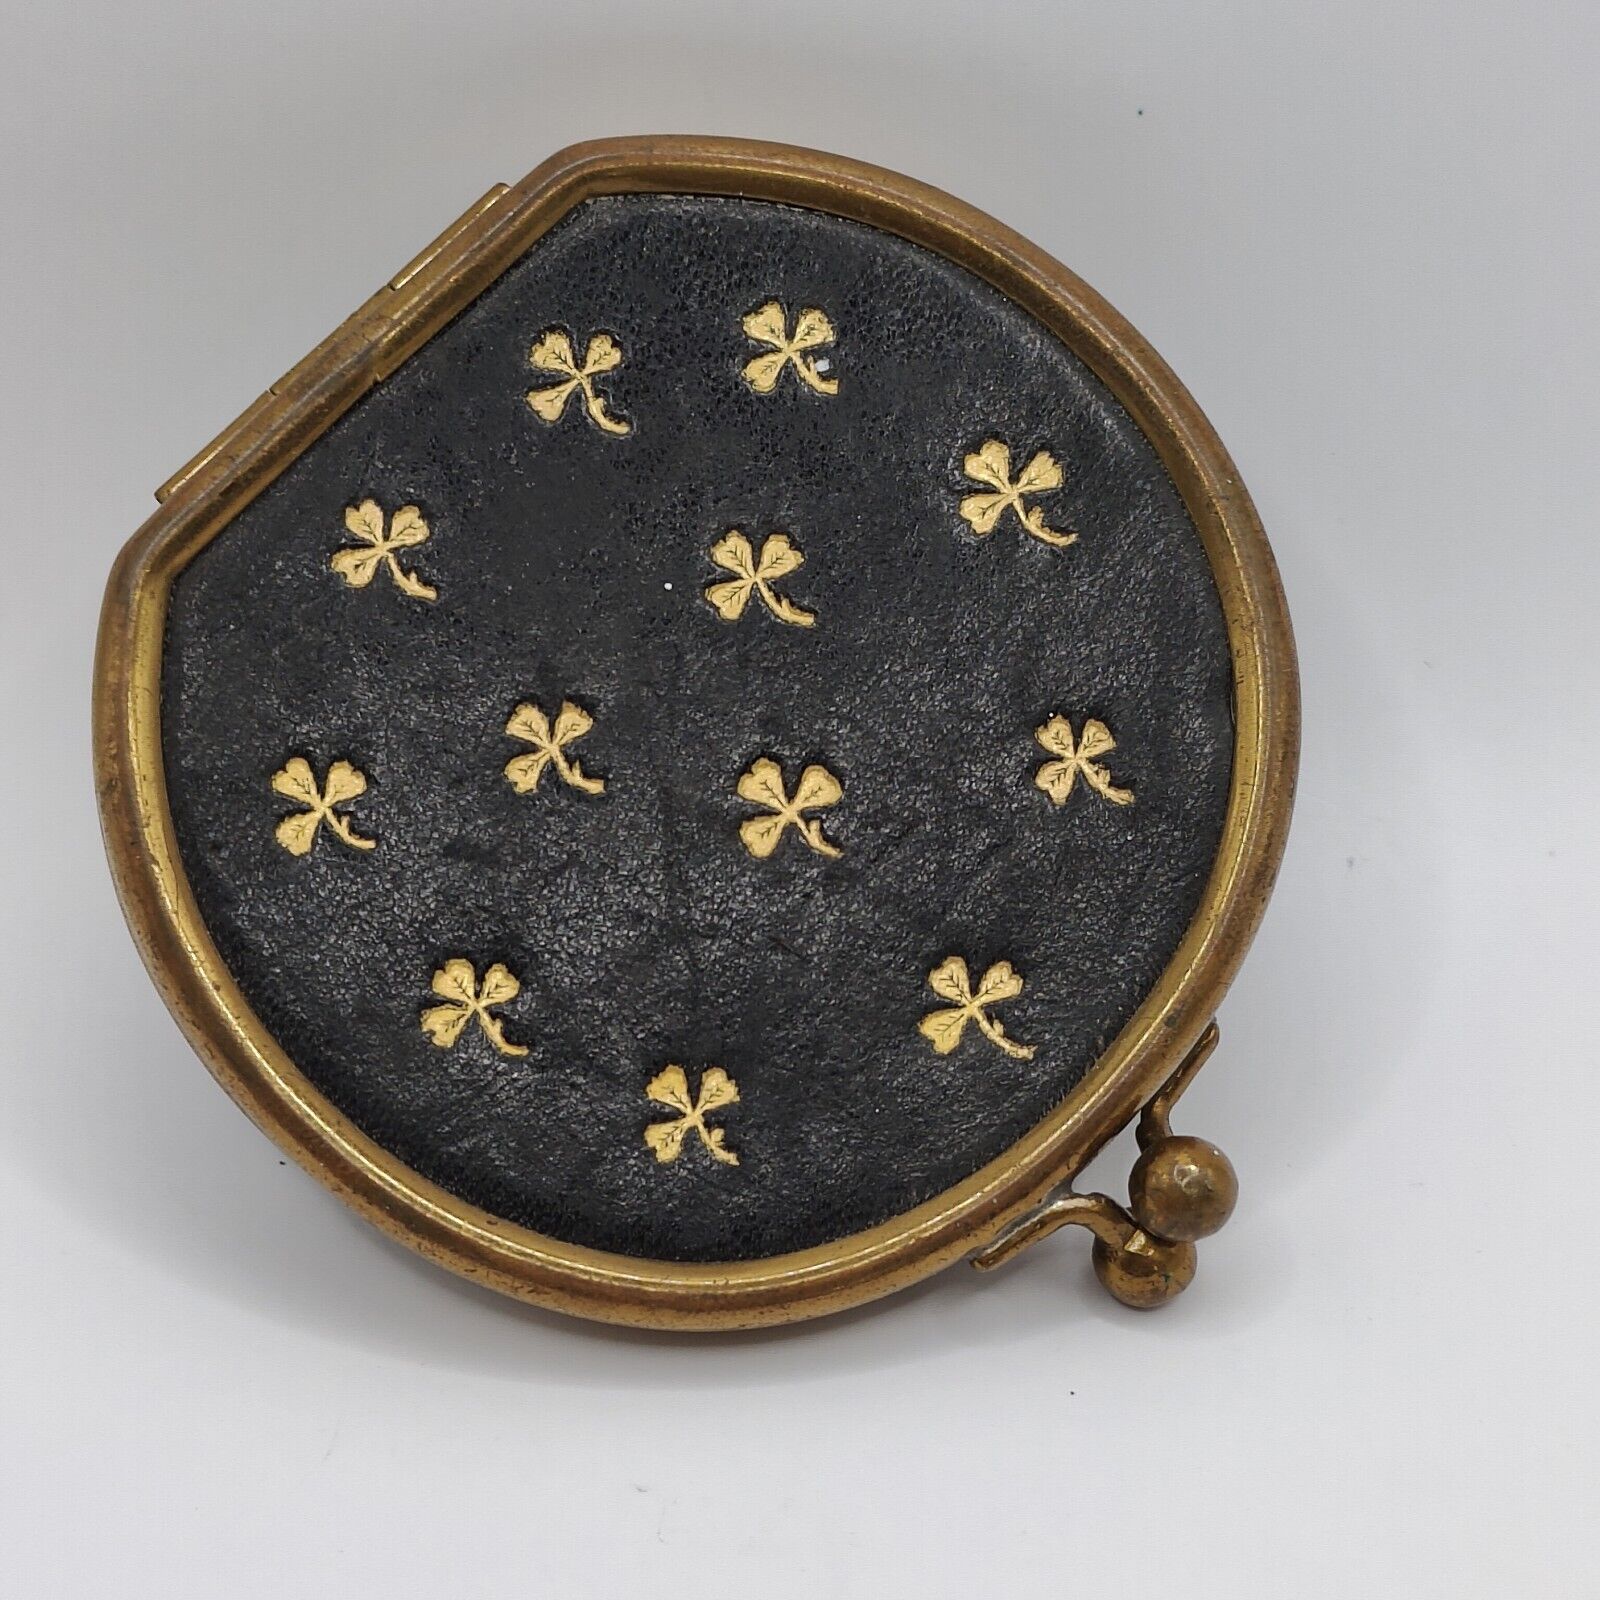 Vintage Black Leather w Gold Clover Pattern Mirror Make Up Powder Puff Compact